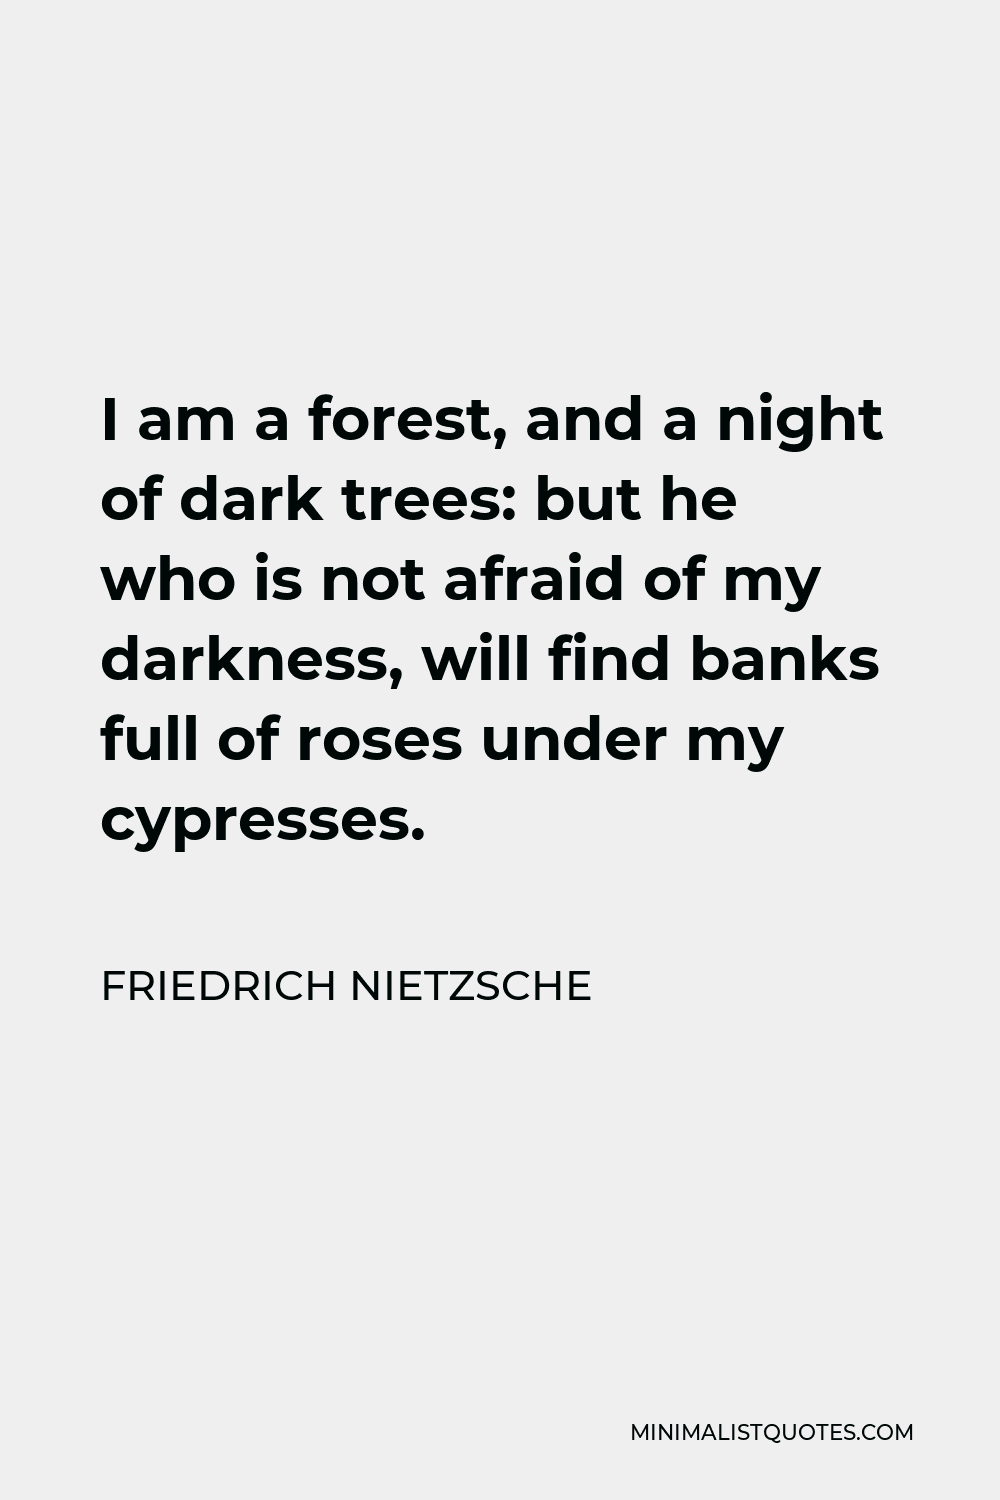 Friedrich Nietzsche Quote - I am a forest, and a night of dark trees: but he who is not afraid of my darkness, will find banks full of roses under my cypresses.